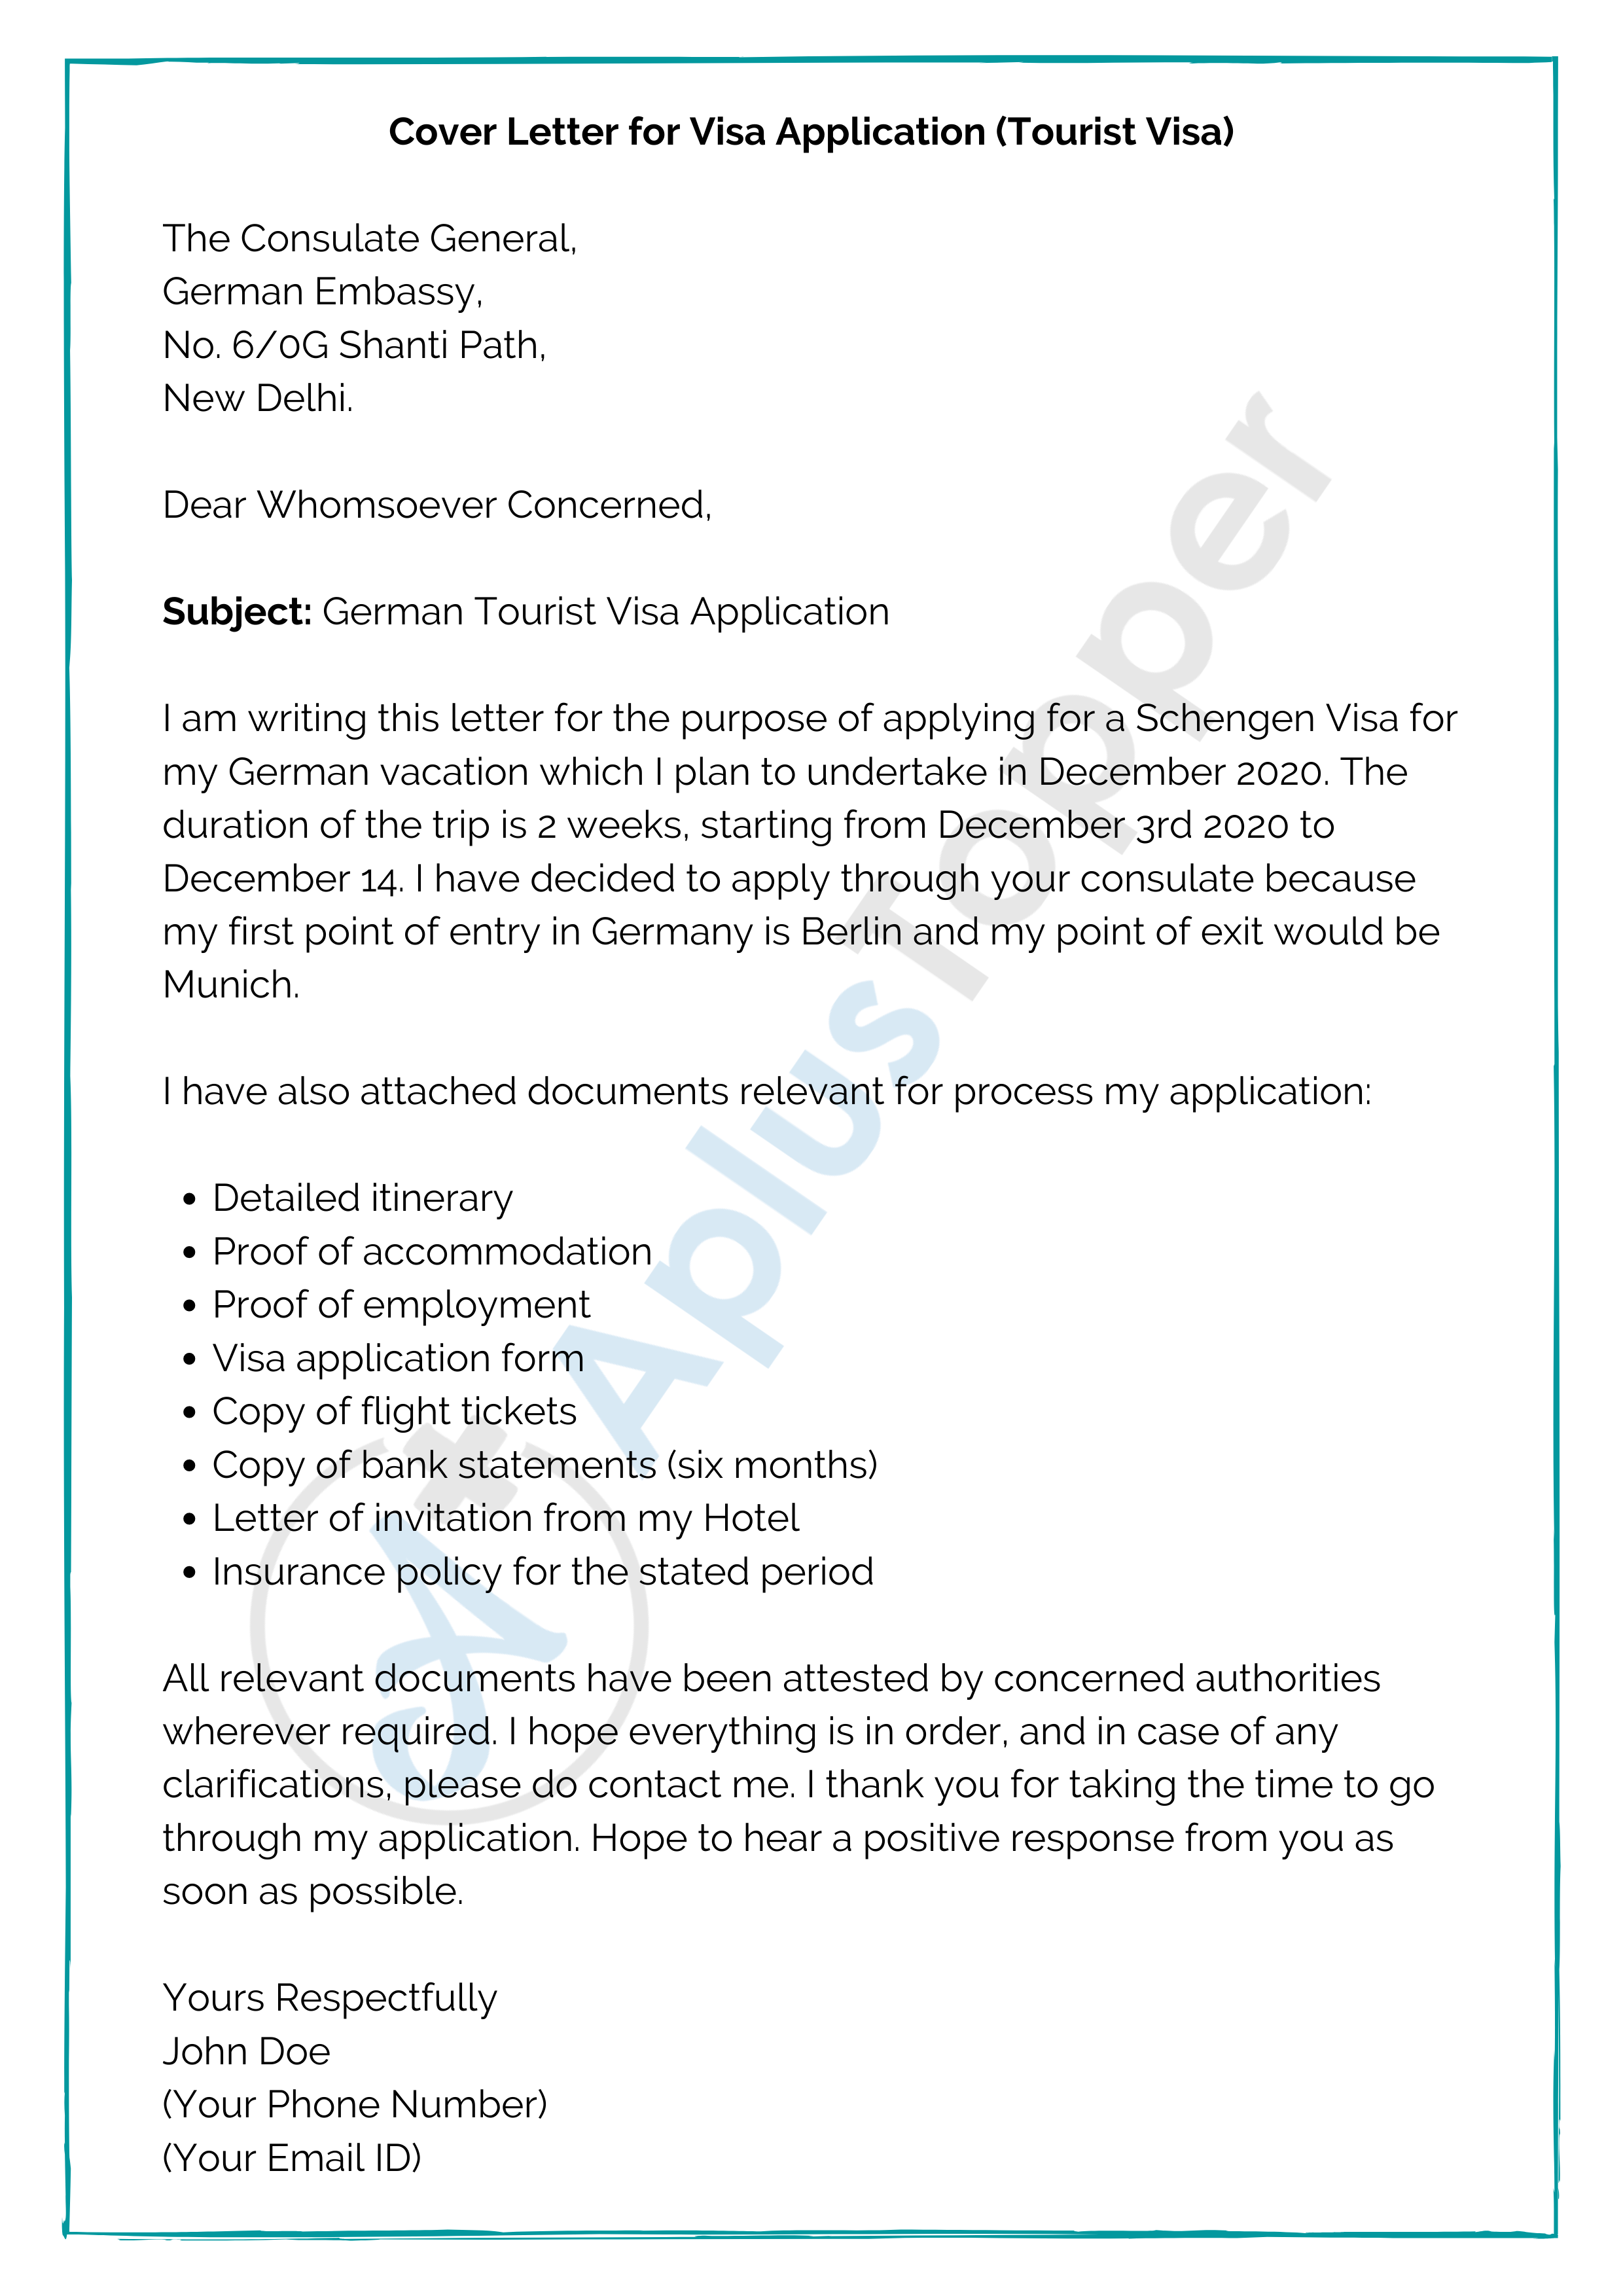 how to write cover letter for student visa